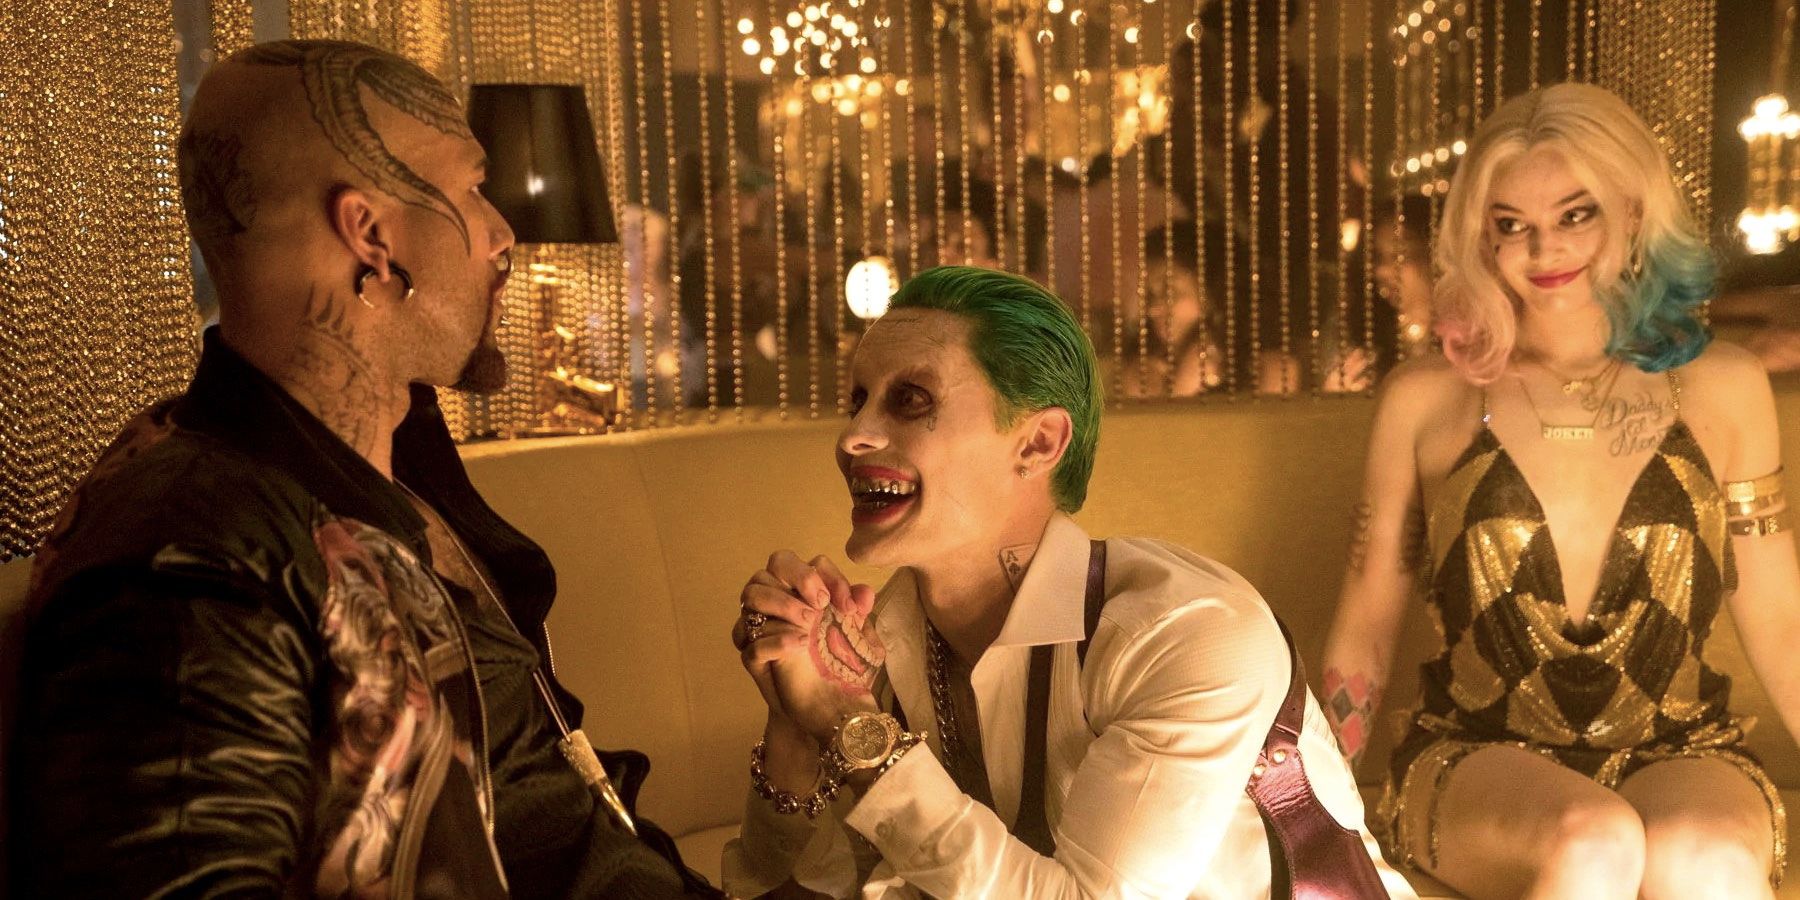 Common as Monster T, Jared Leto as Joker and Margot Robbie as Harley Quinn in Suicide Squad